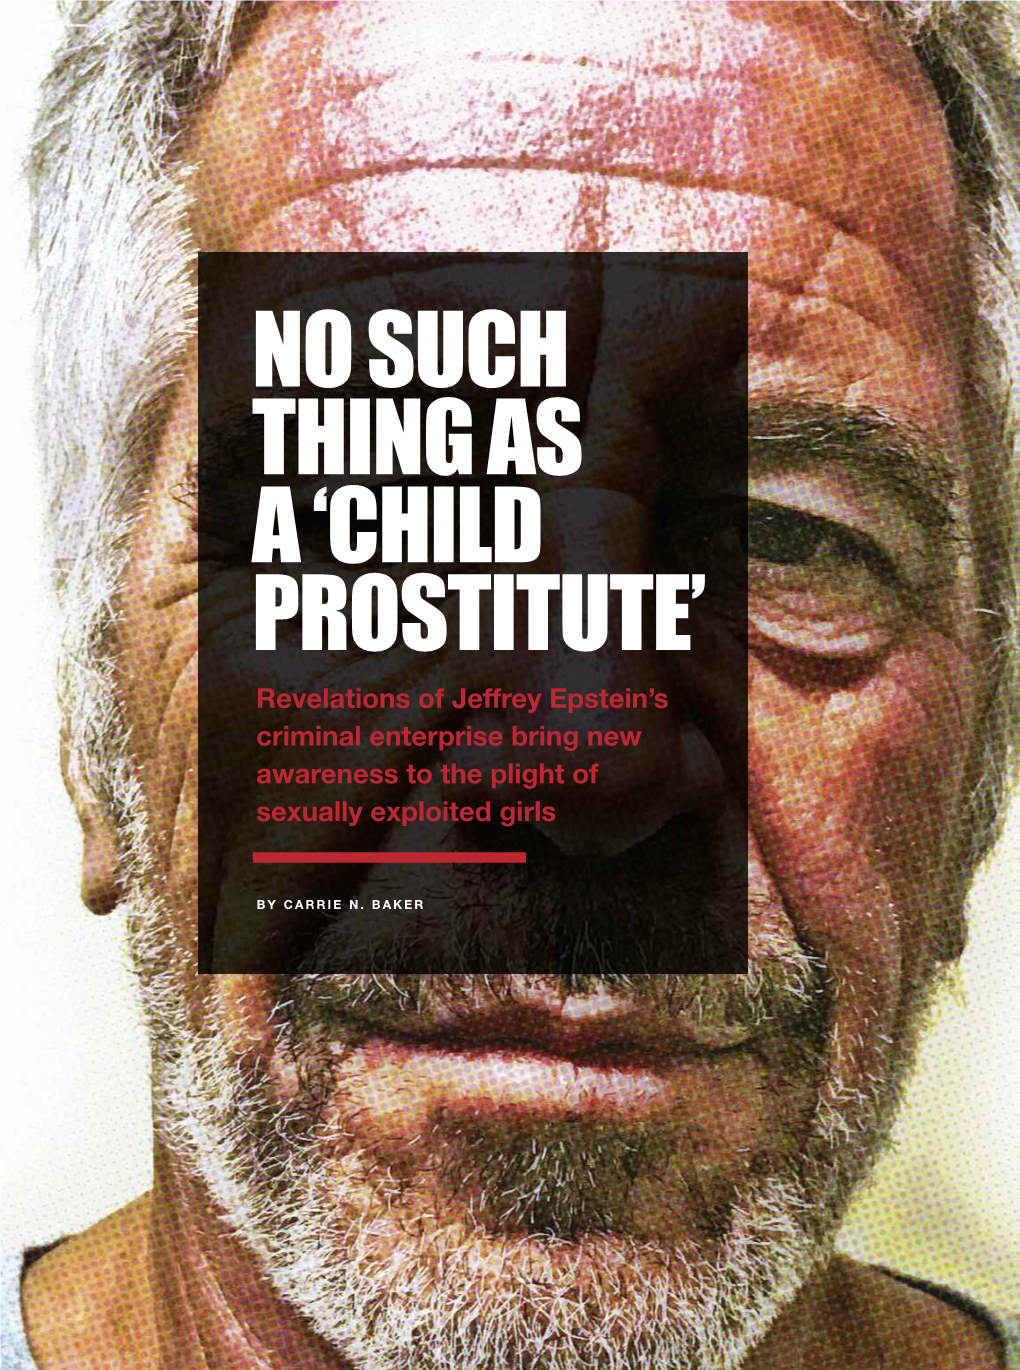 No Such Thing As a 'Child Prostitute'